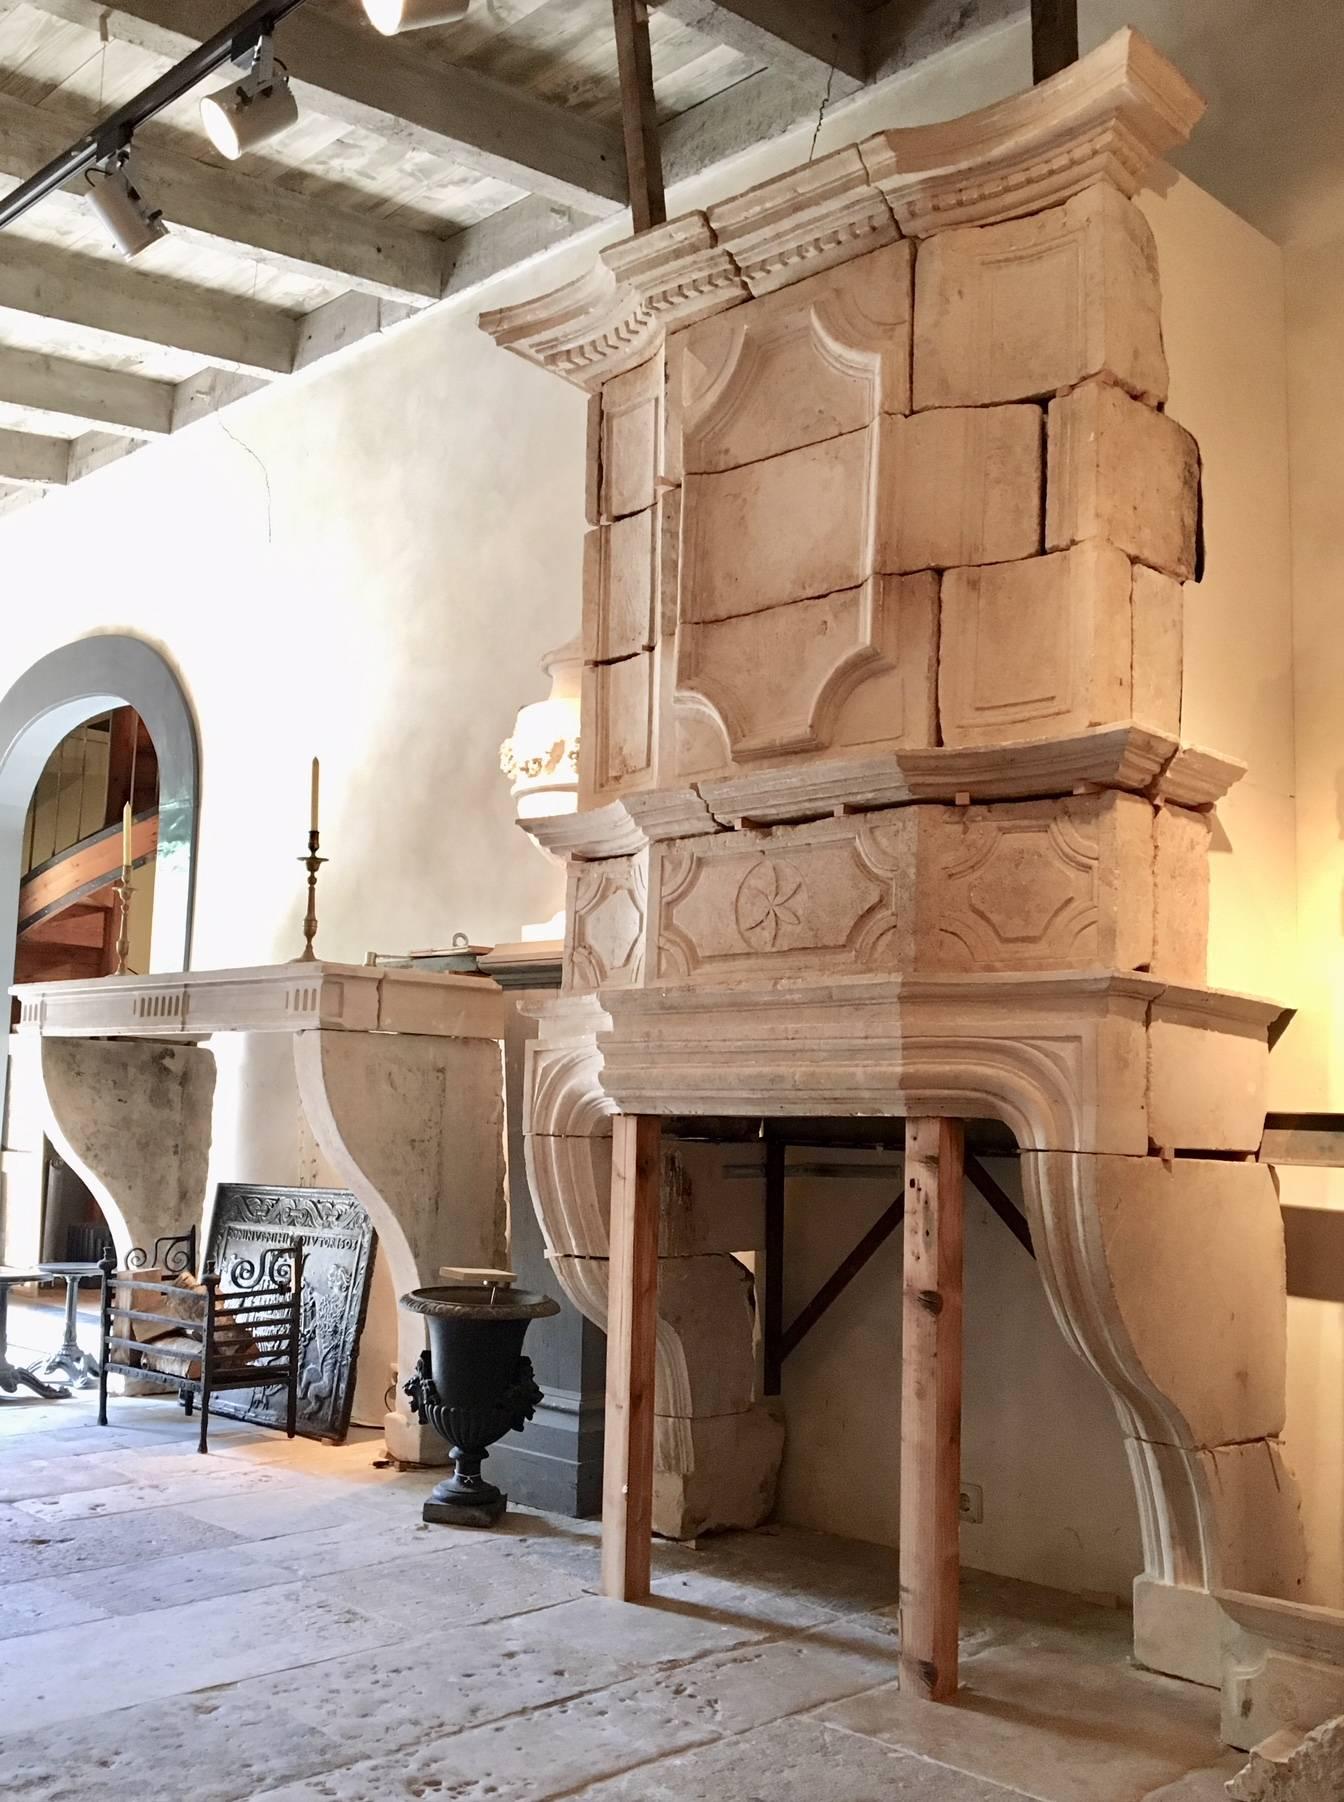 This rare late 17th century fireplace was made in France during the reign of Louis XIV.
The fireplace was made for a wealthy family in the area of Nancy. Up until recently the fireplace was still situated in the original family home.

The